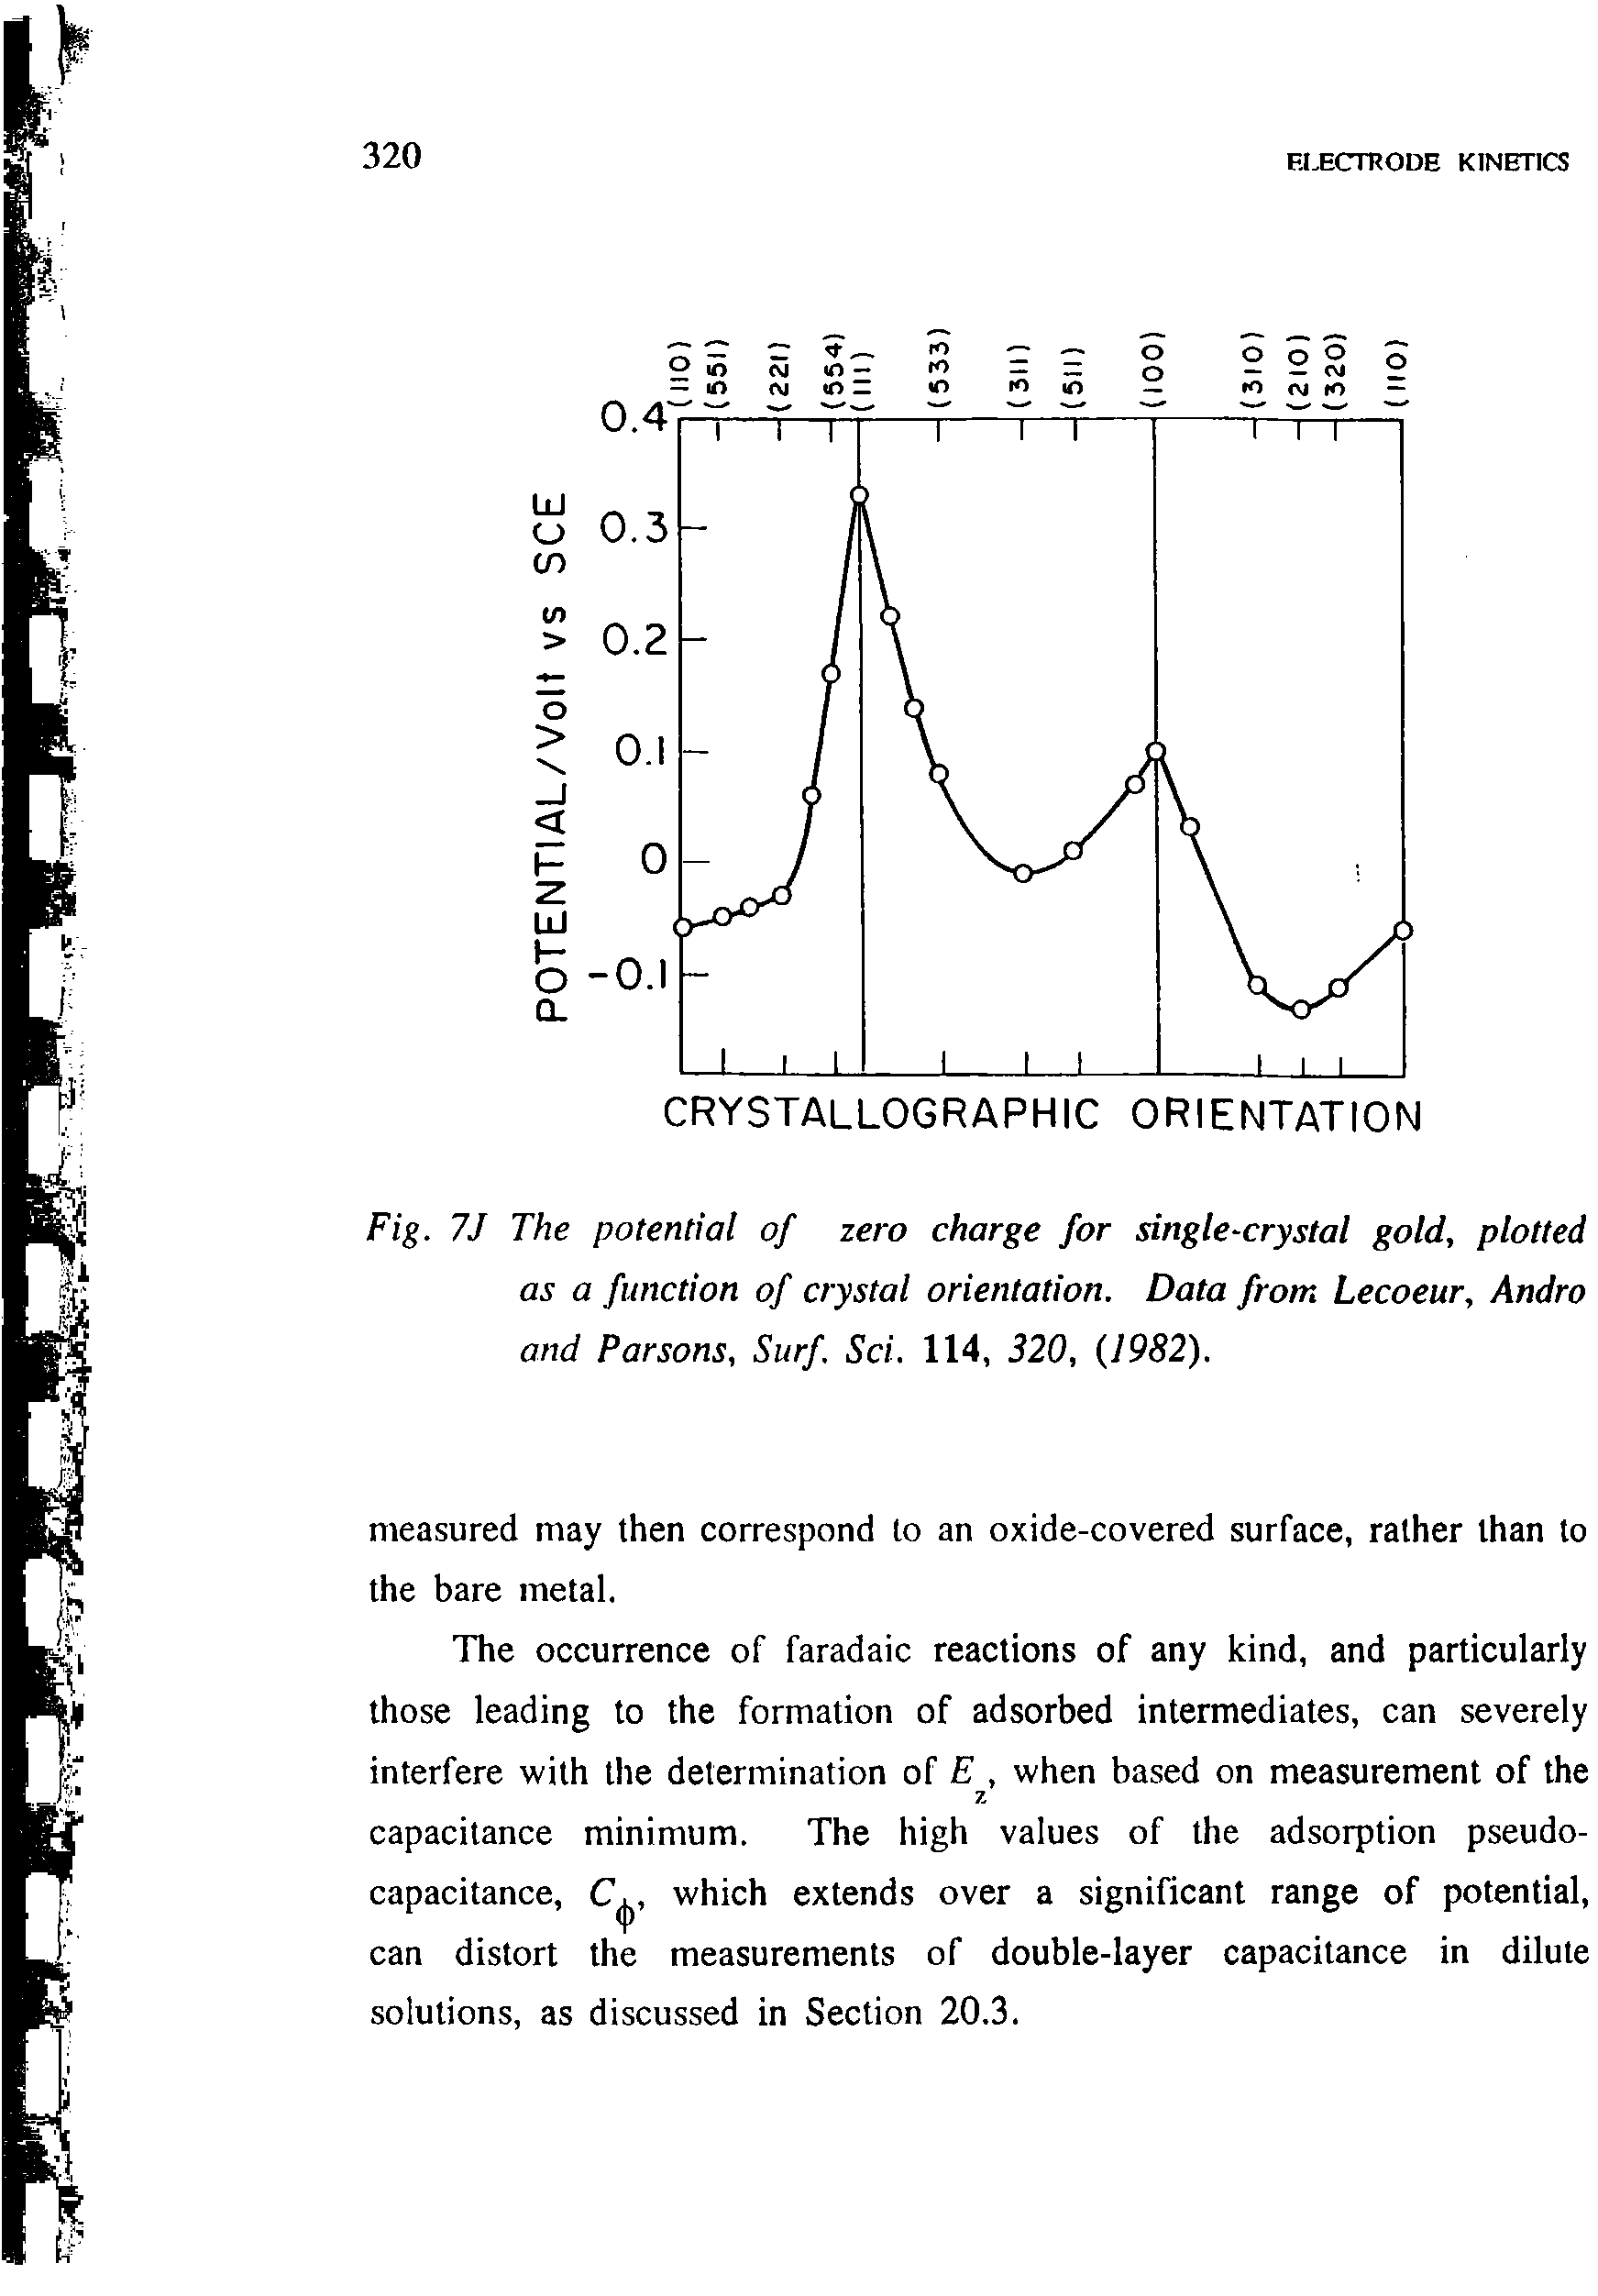 Fig. 7J The potential of zero charge for single-crystal gold, plotted as a function of crystal orientation. Data from Lecoeur, Andro and Parsons, Surf. Sci. 114, 320, (,1982).